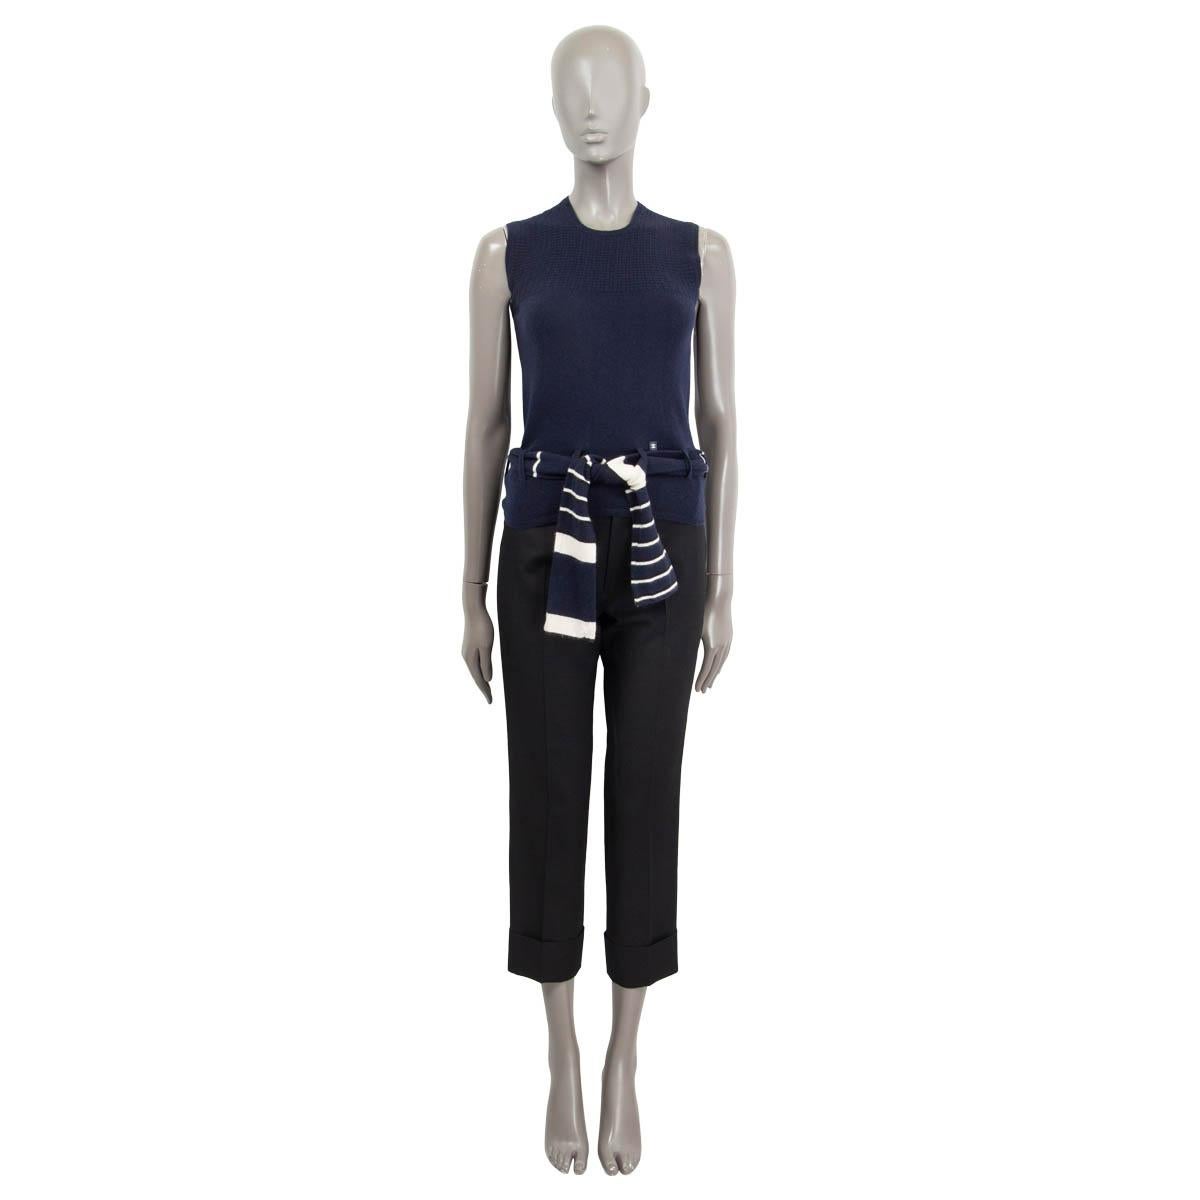 100% authentic Chanel sleeveless knit top in navy cashmere (100%). Features is a navy, black and off-white striped belt. Unlined. has been worn and is in excellent condition.

Chanel 2002

Measurements
Model	Chanel02C
Tag Size	38
Size	S
Shoulder